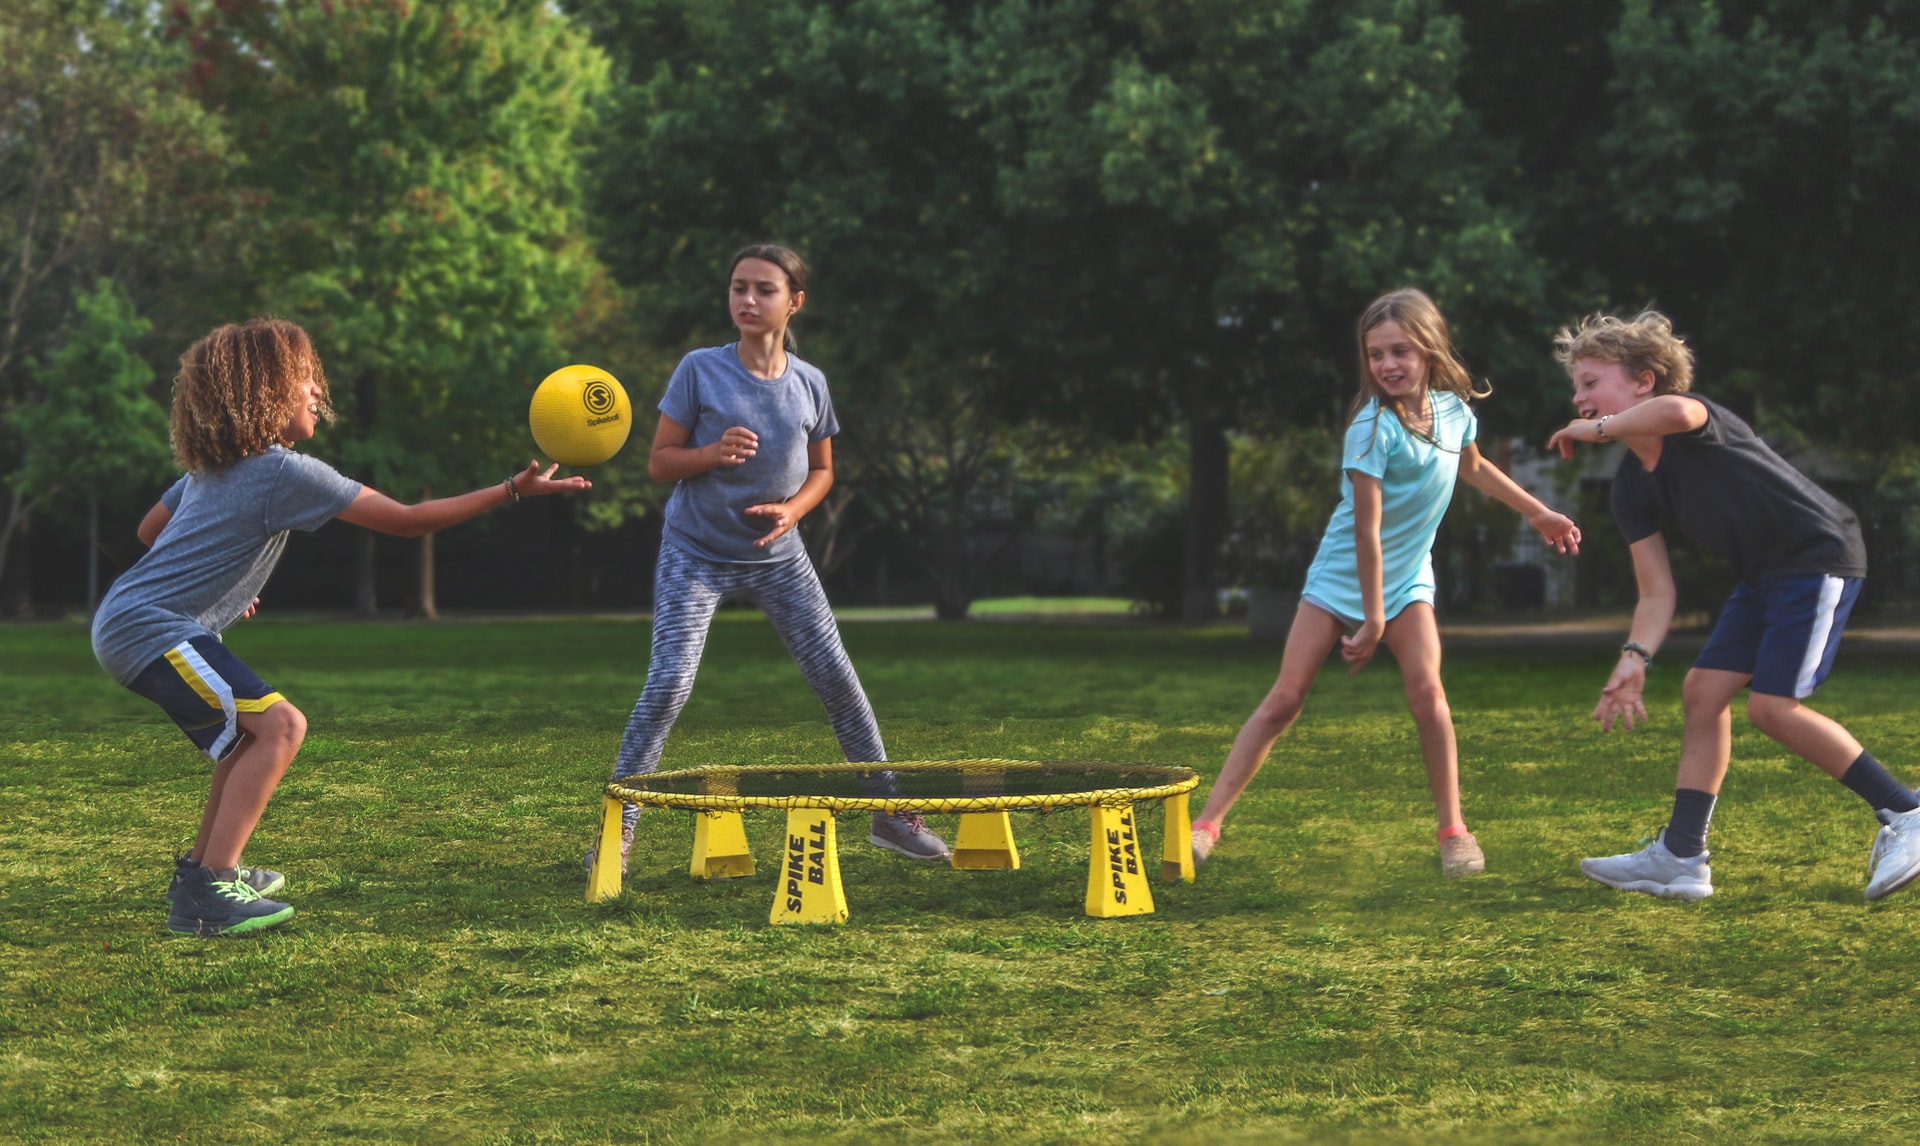 7 Fun Backyard Games For The Whole Family